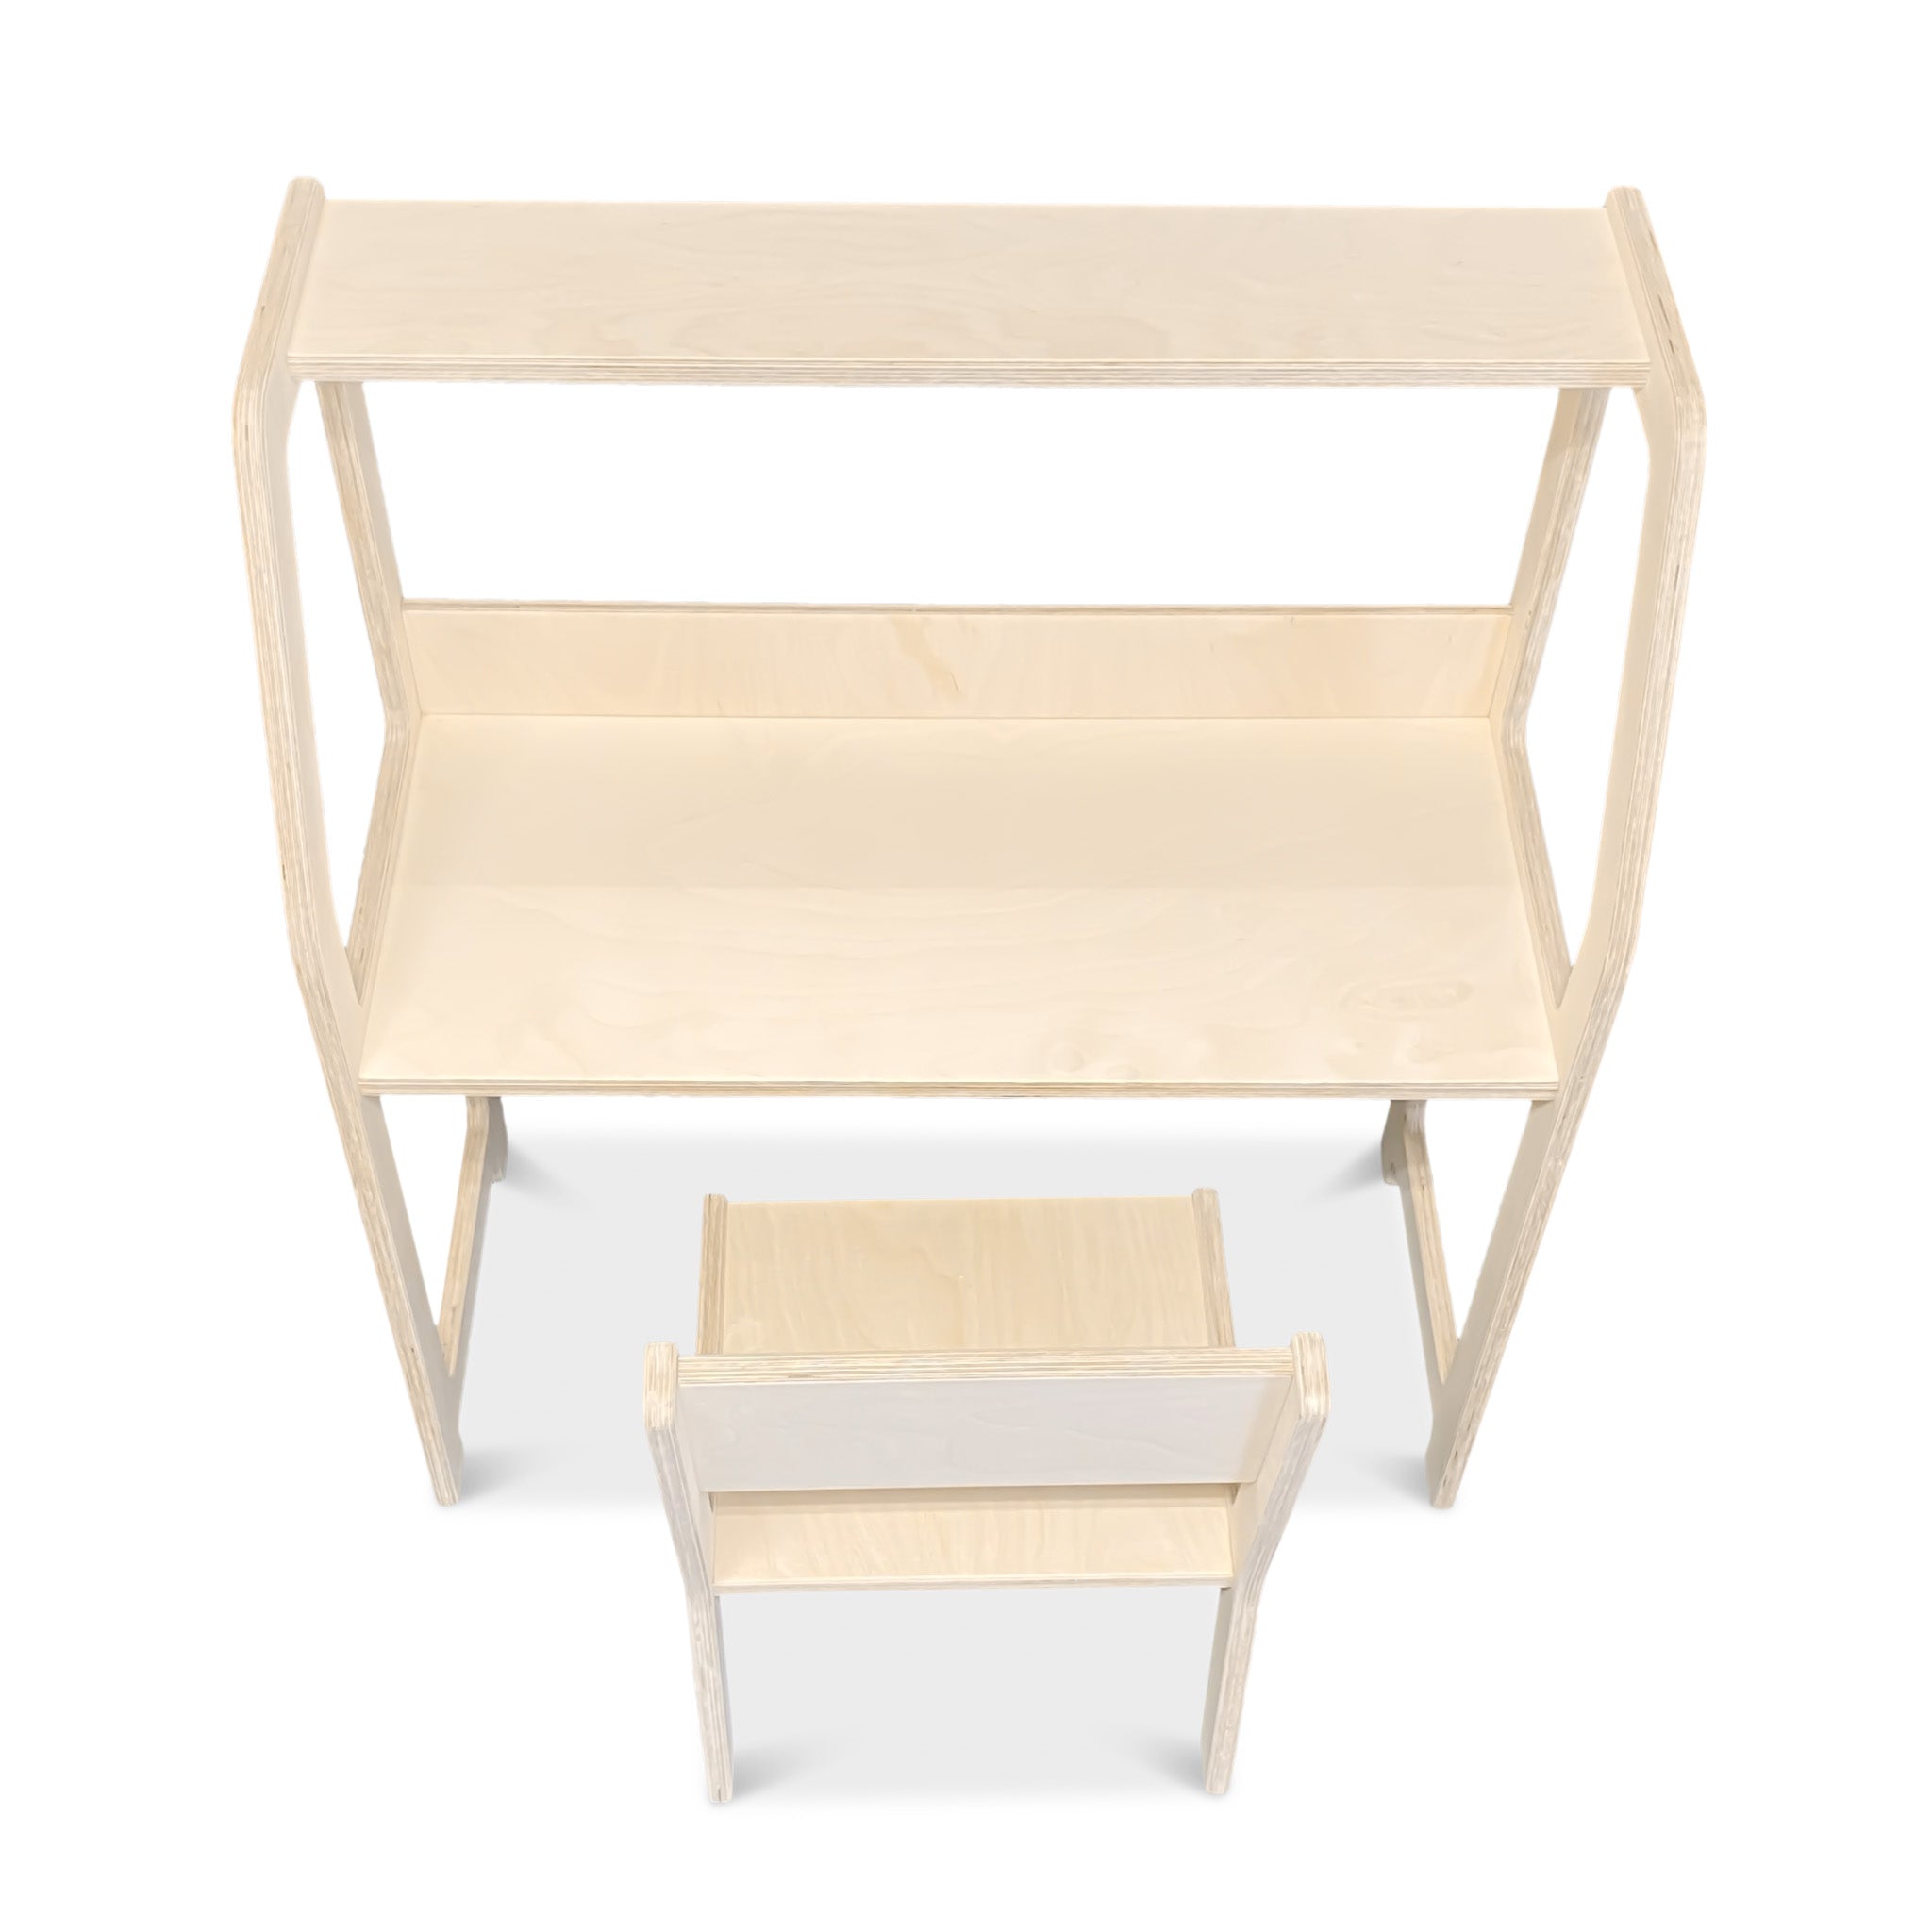 Montessori desk children's room 2-7 years | With chair - natural